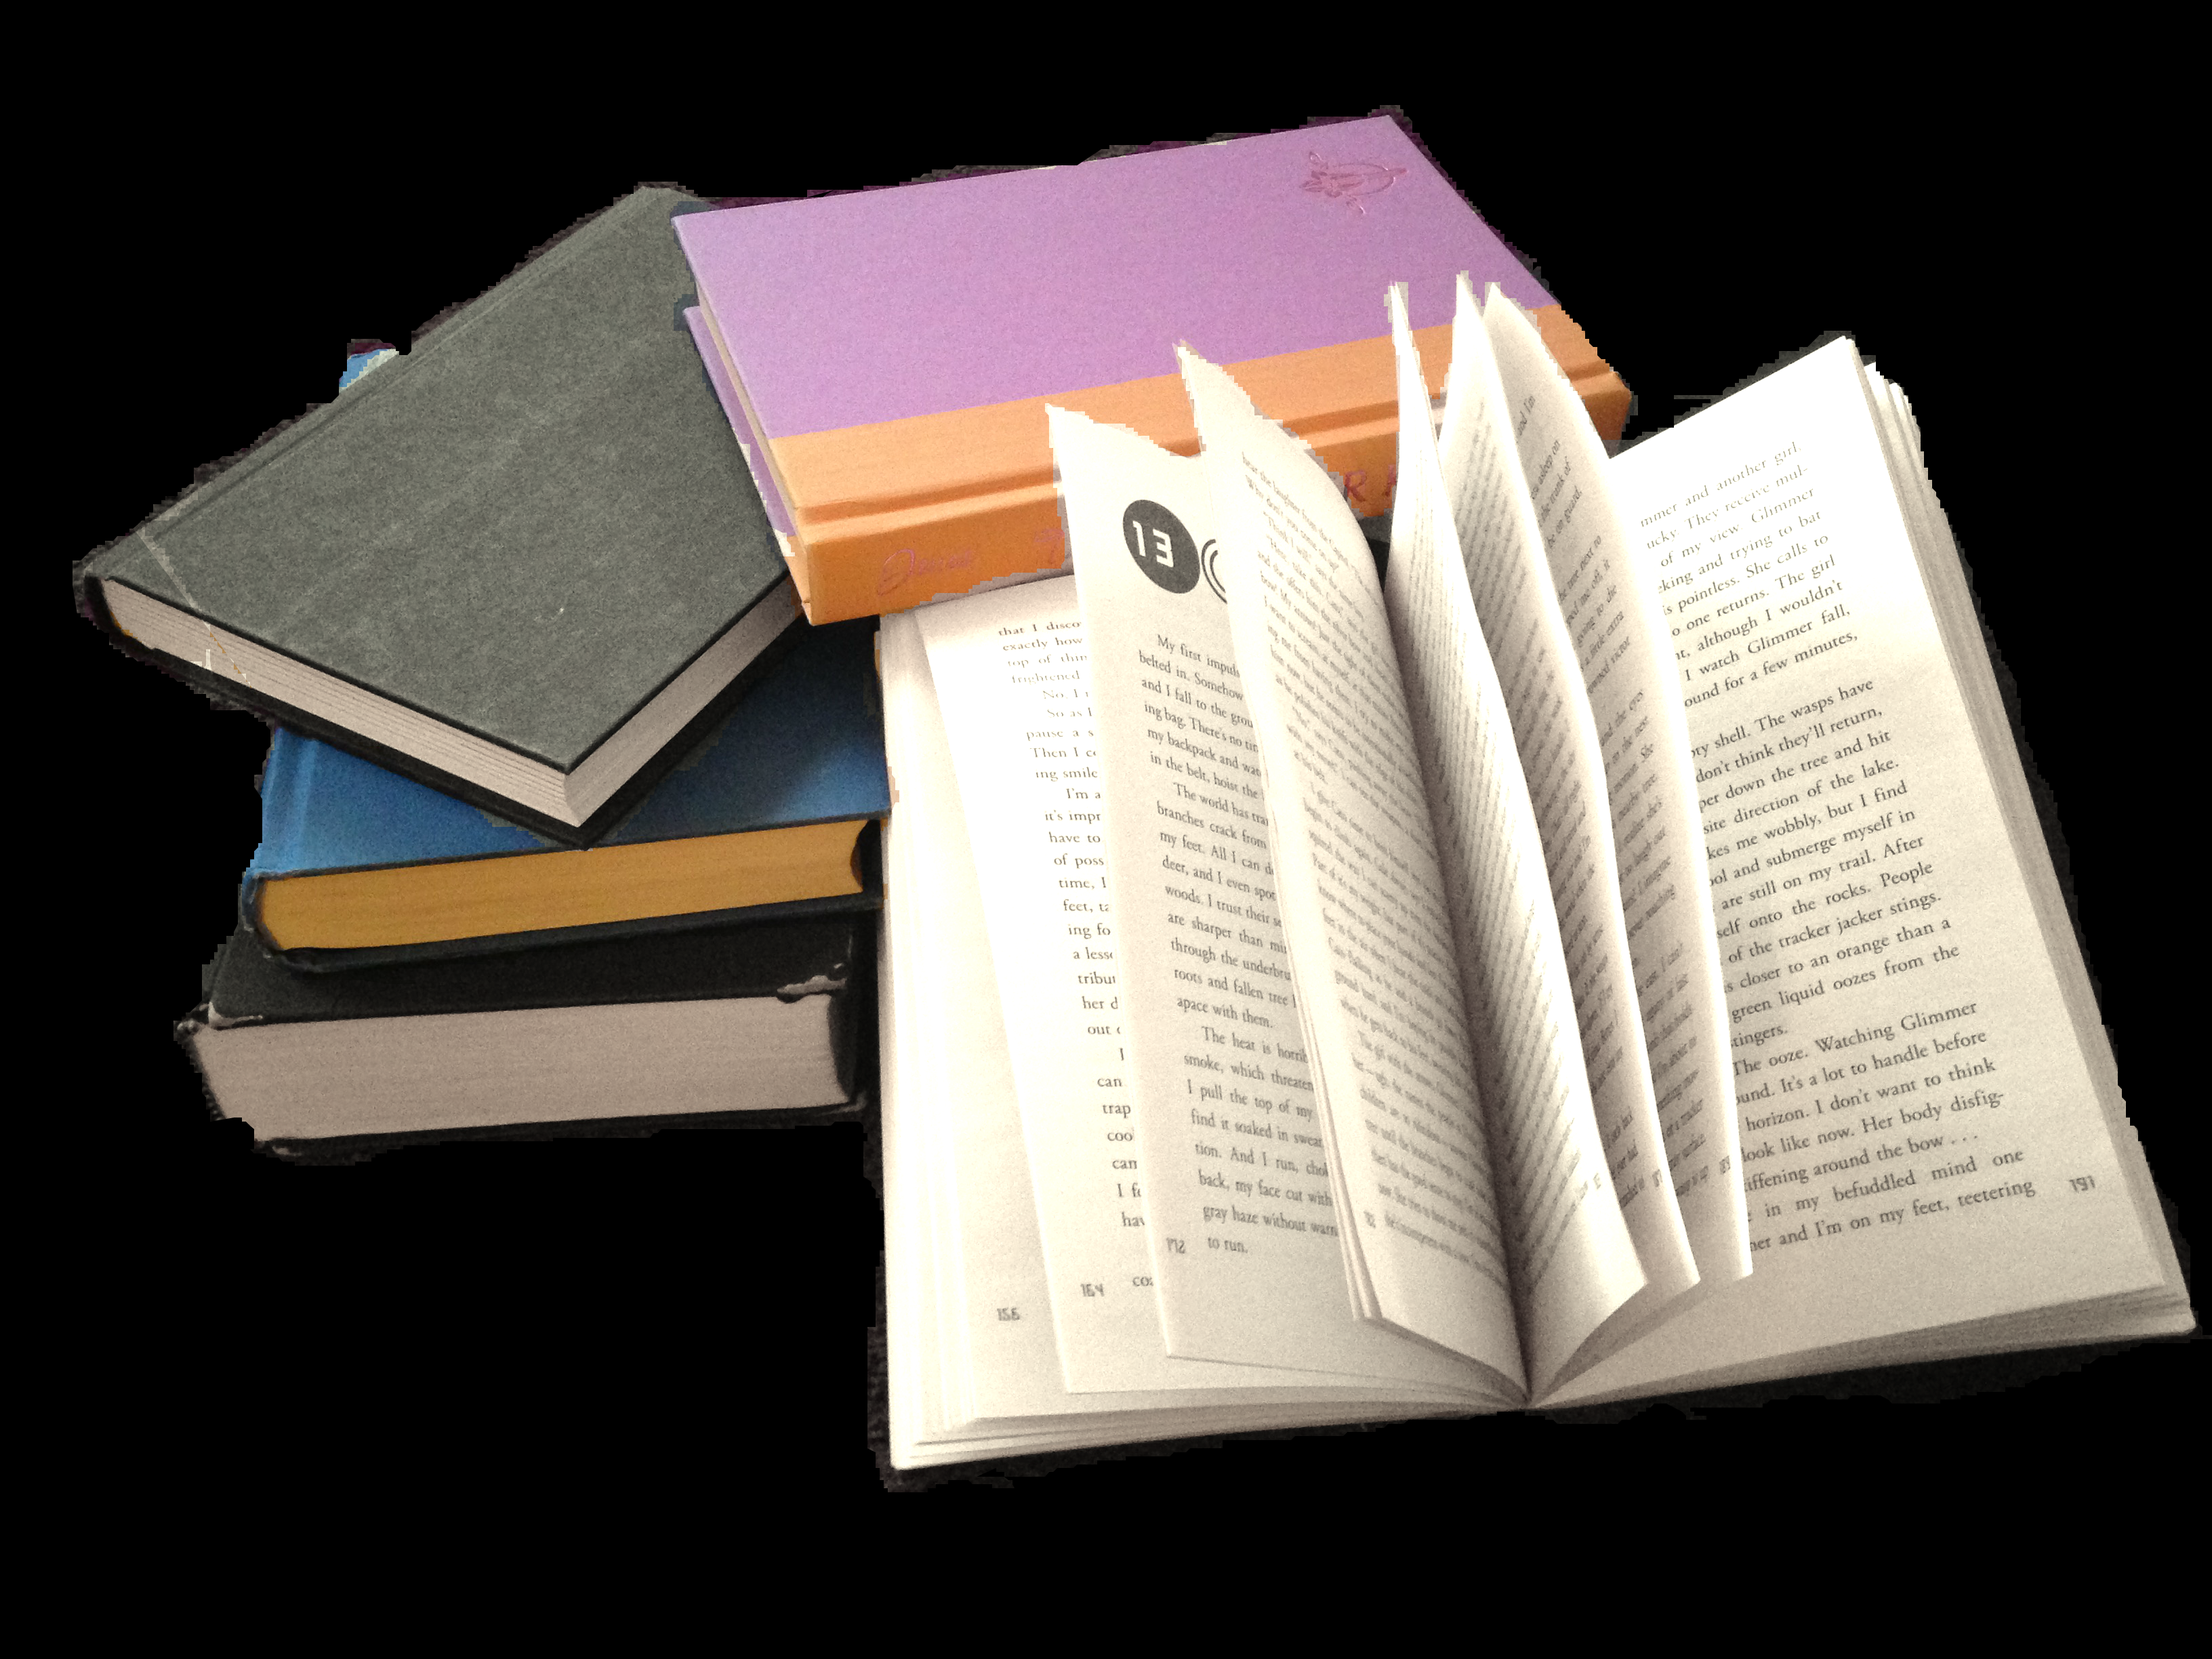 File:A Stack of Books.png - Wikimedia Commons